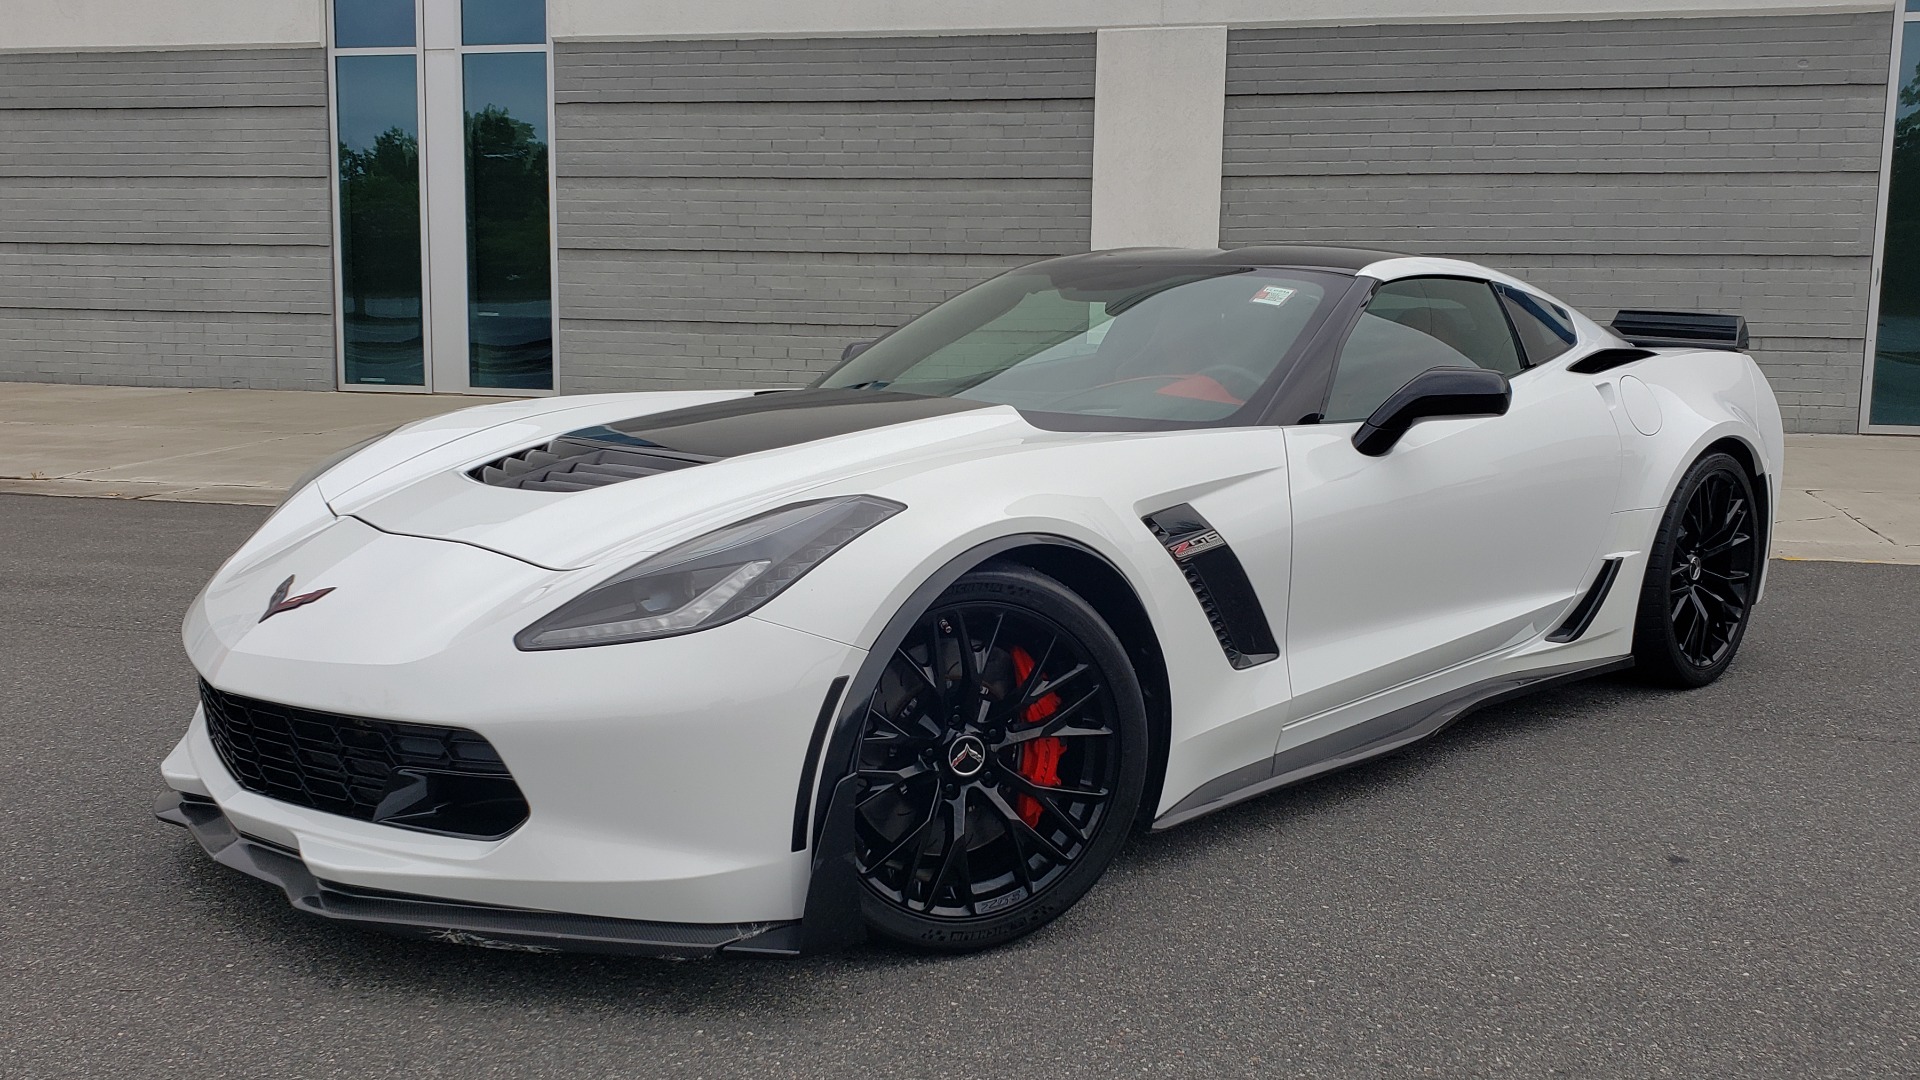 Used 2015 Chevrolet CORVETTE C7 Z06 3LZ COUPE / NAV / COMP STS / CF ROOF / REMOTE START / REARVIEW for sale Sold at Formula Imports in Charlotte NC 28227 6